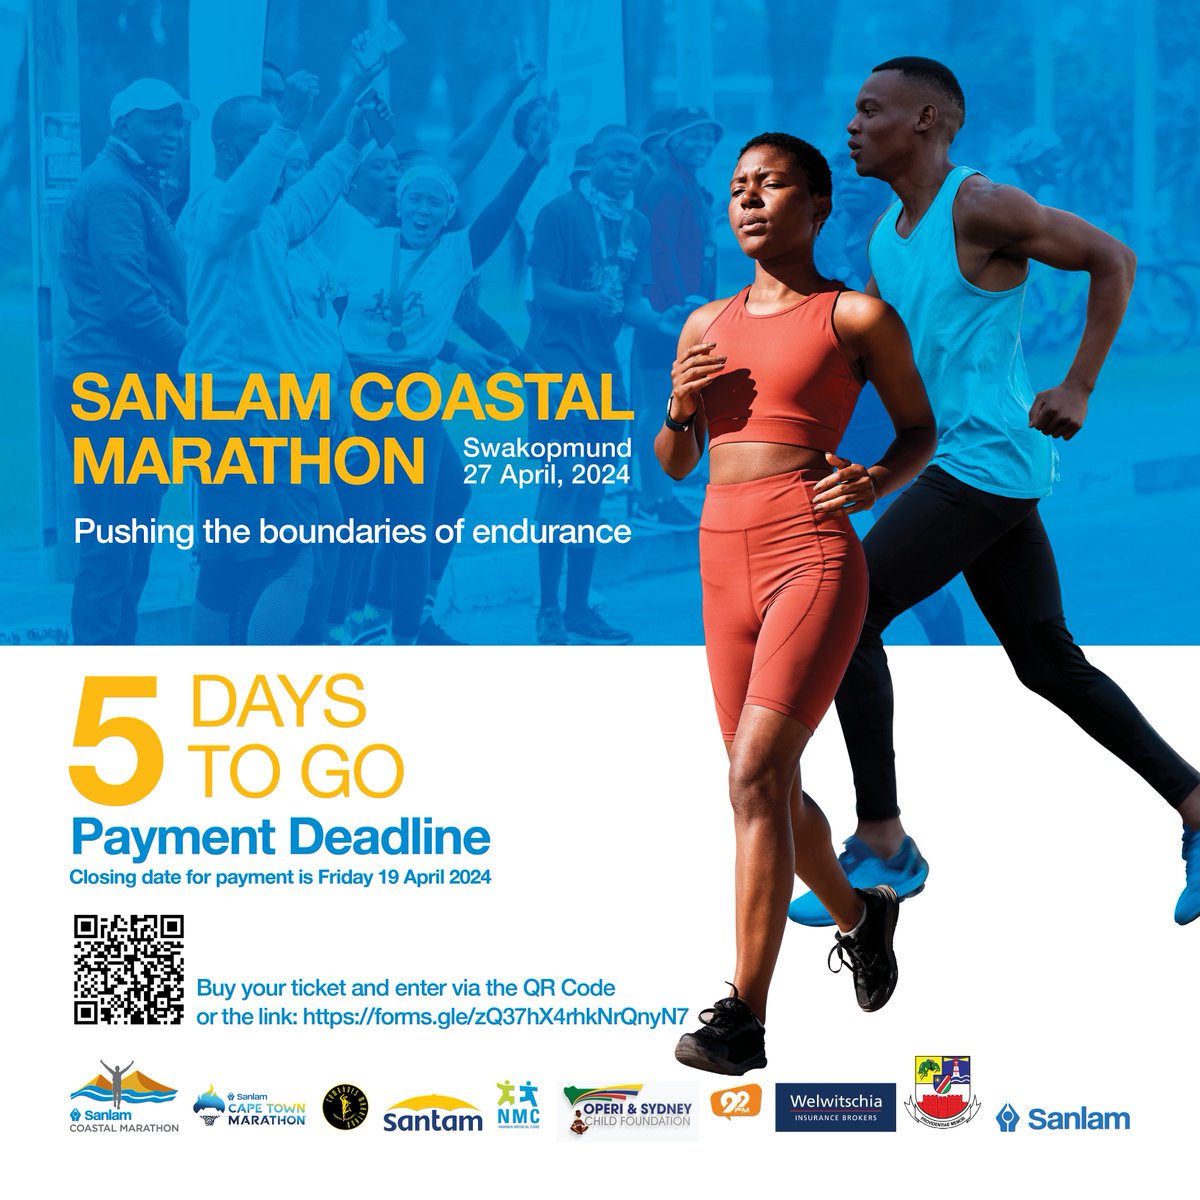 WIN! WIN! WIN! 🏃‍♂️5 Days Countdown Tip: Listen to Your Body If your body feels tired, listen to it and rest. Share your strategies for balancing training & rest in the comments for a chance to win 1 of 10 running kits courtesy of Sanlam. #SanlamCoastalMarathon